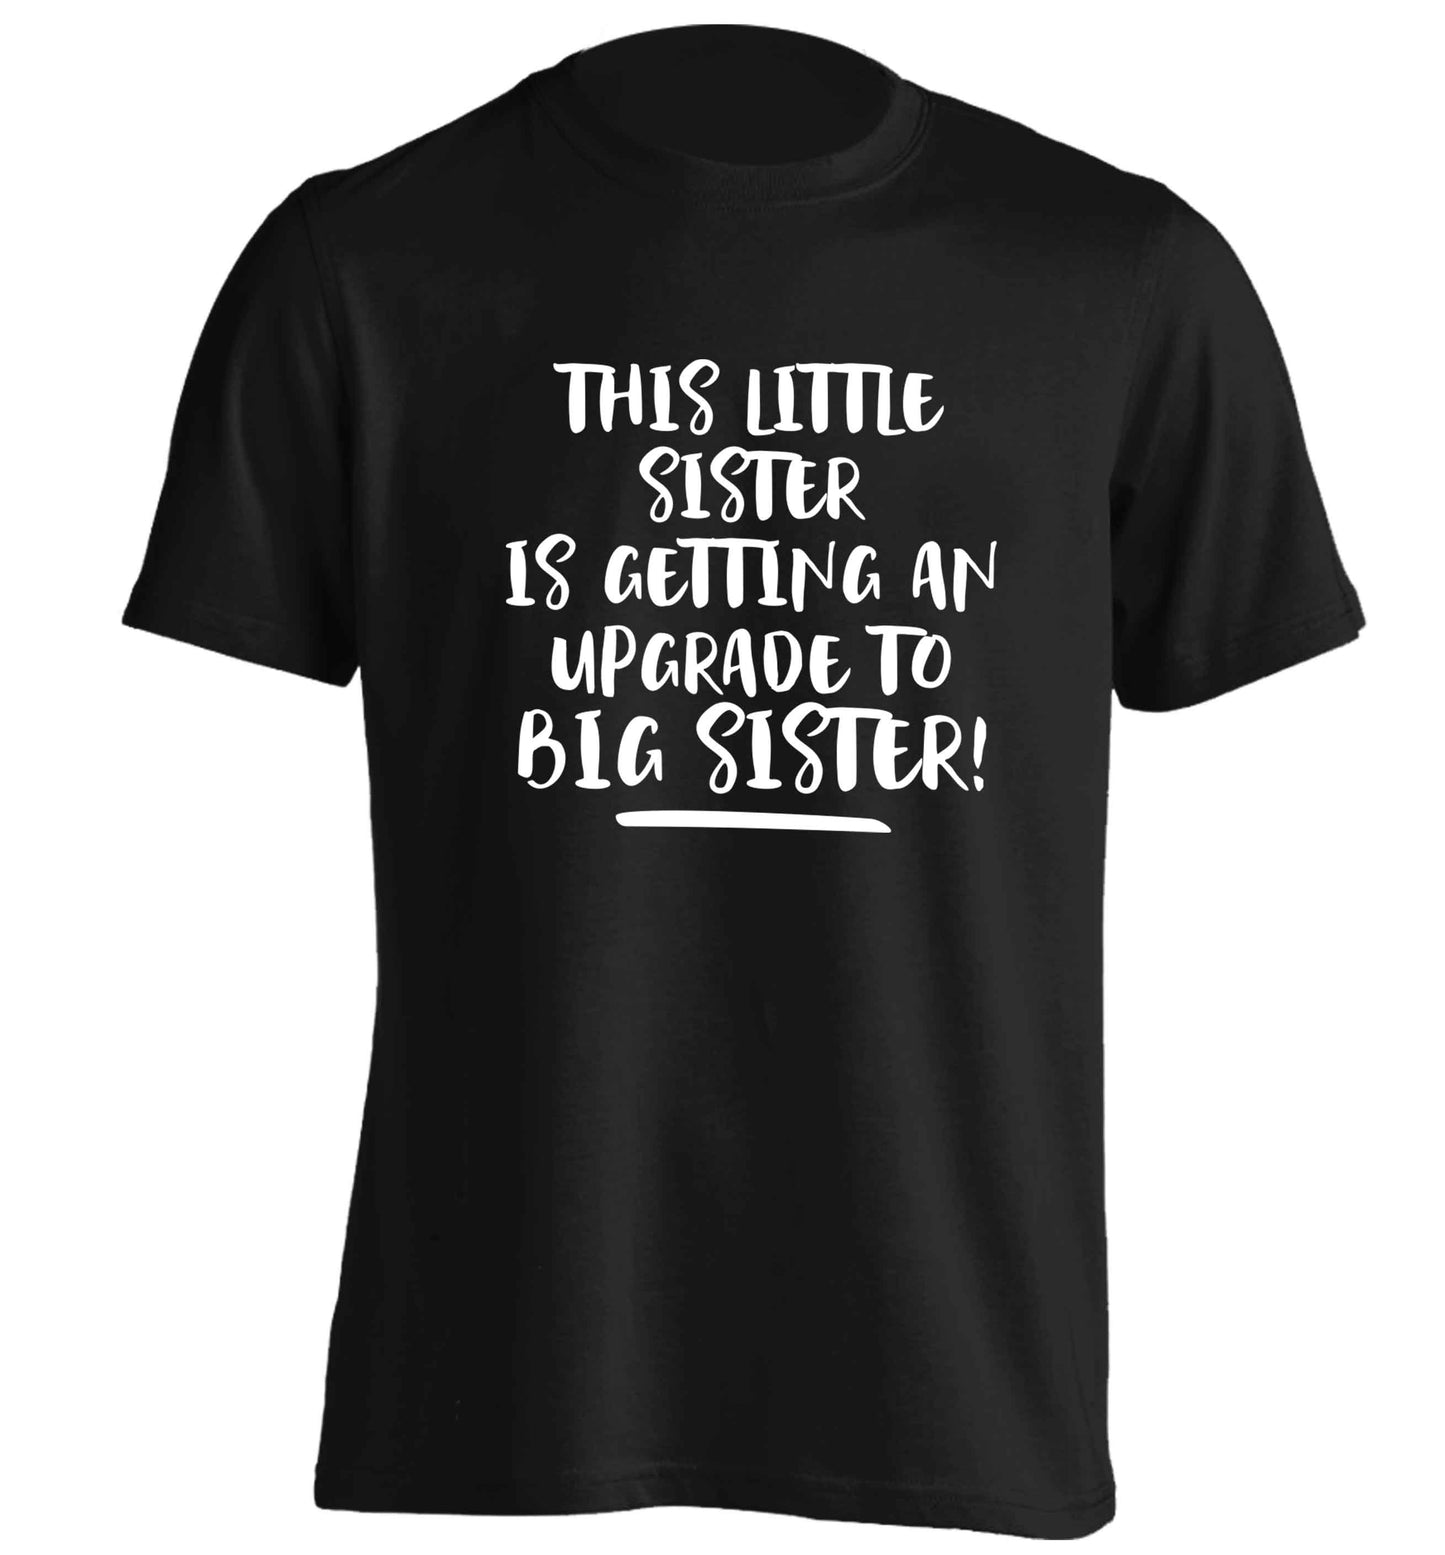 This little sister is getting an upgrade to big sister! adults unisex black Tshirt 2XL